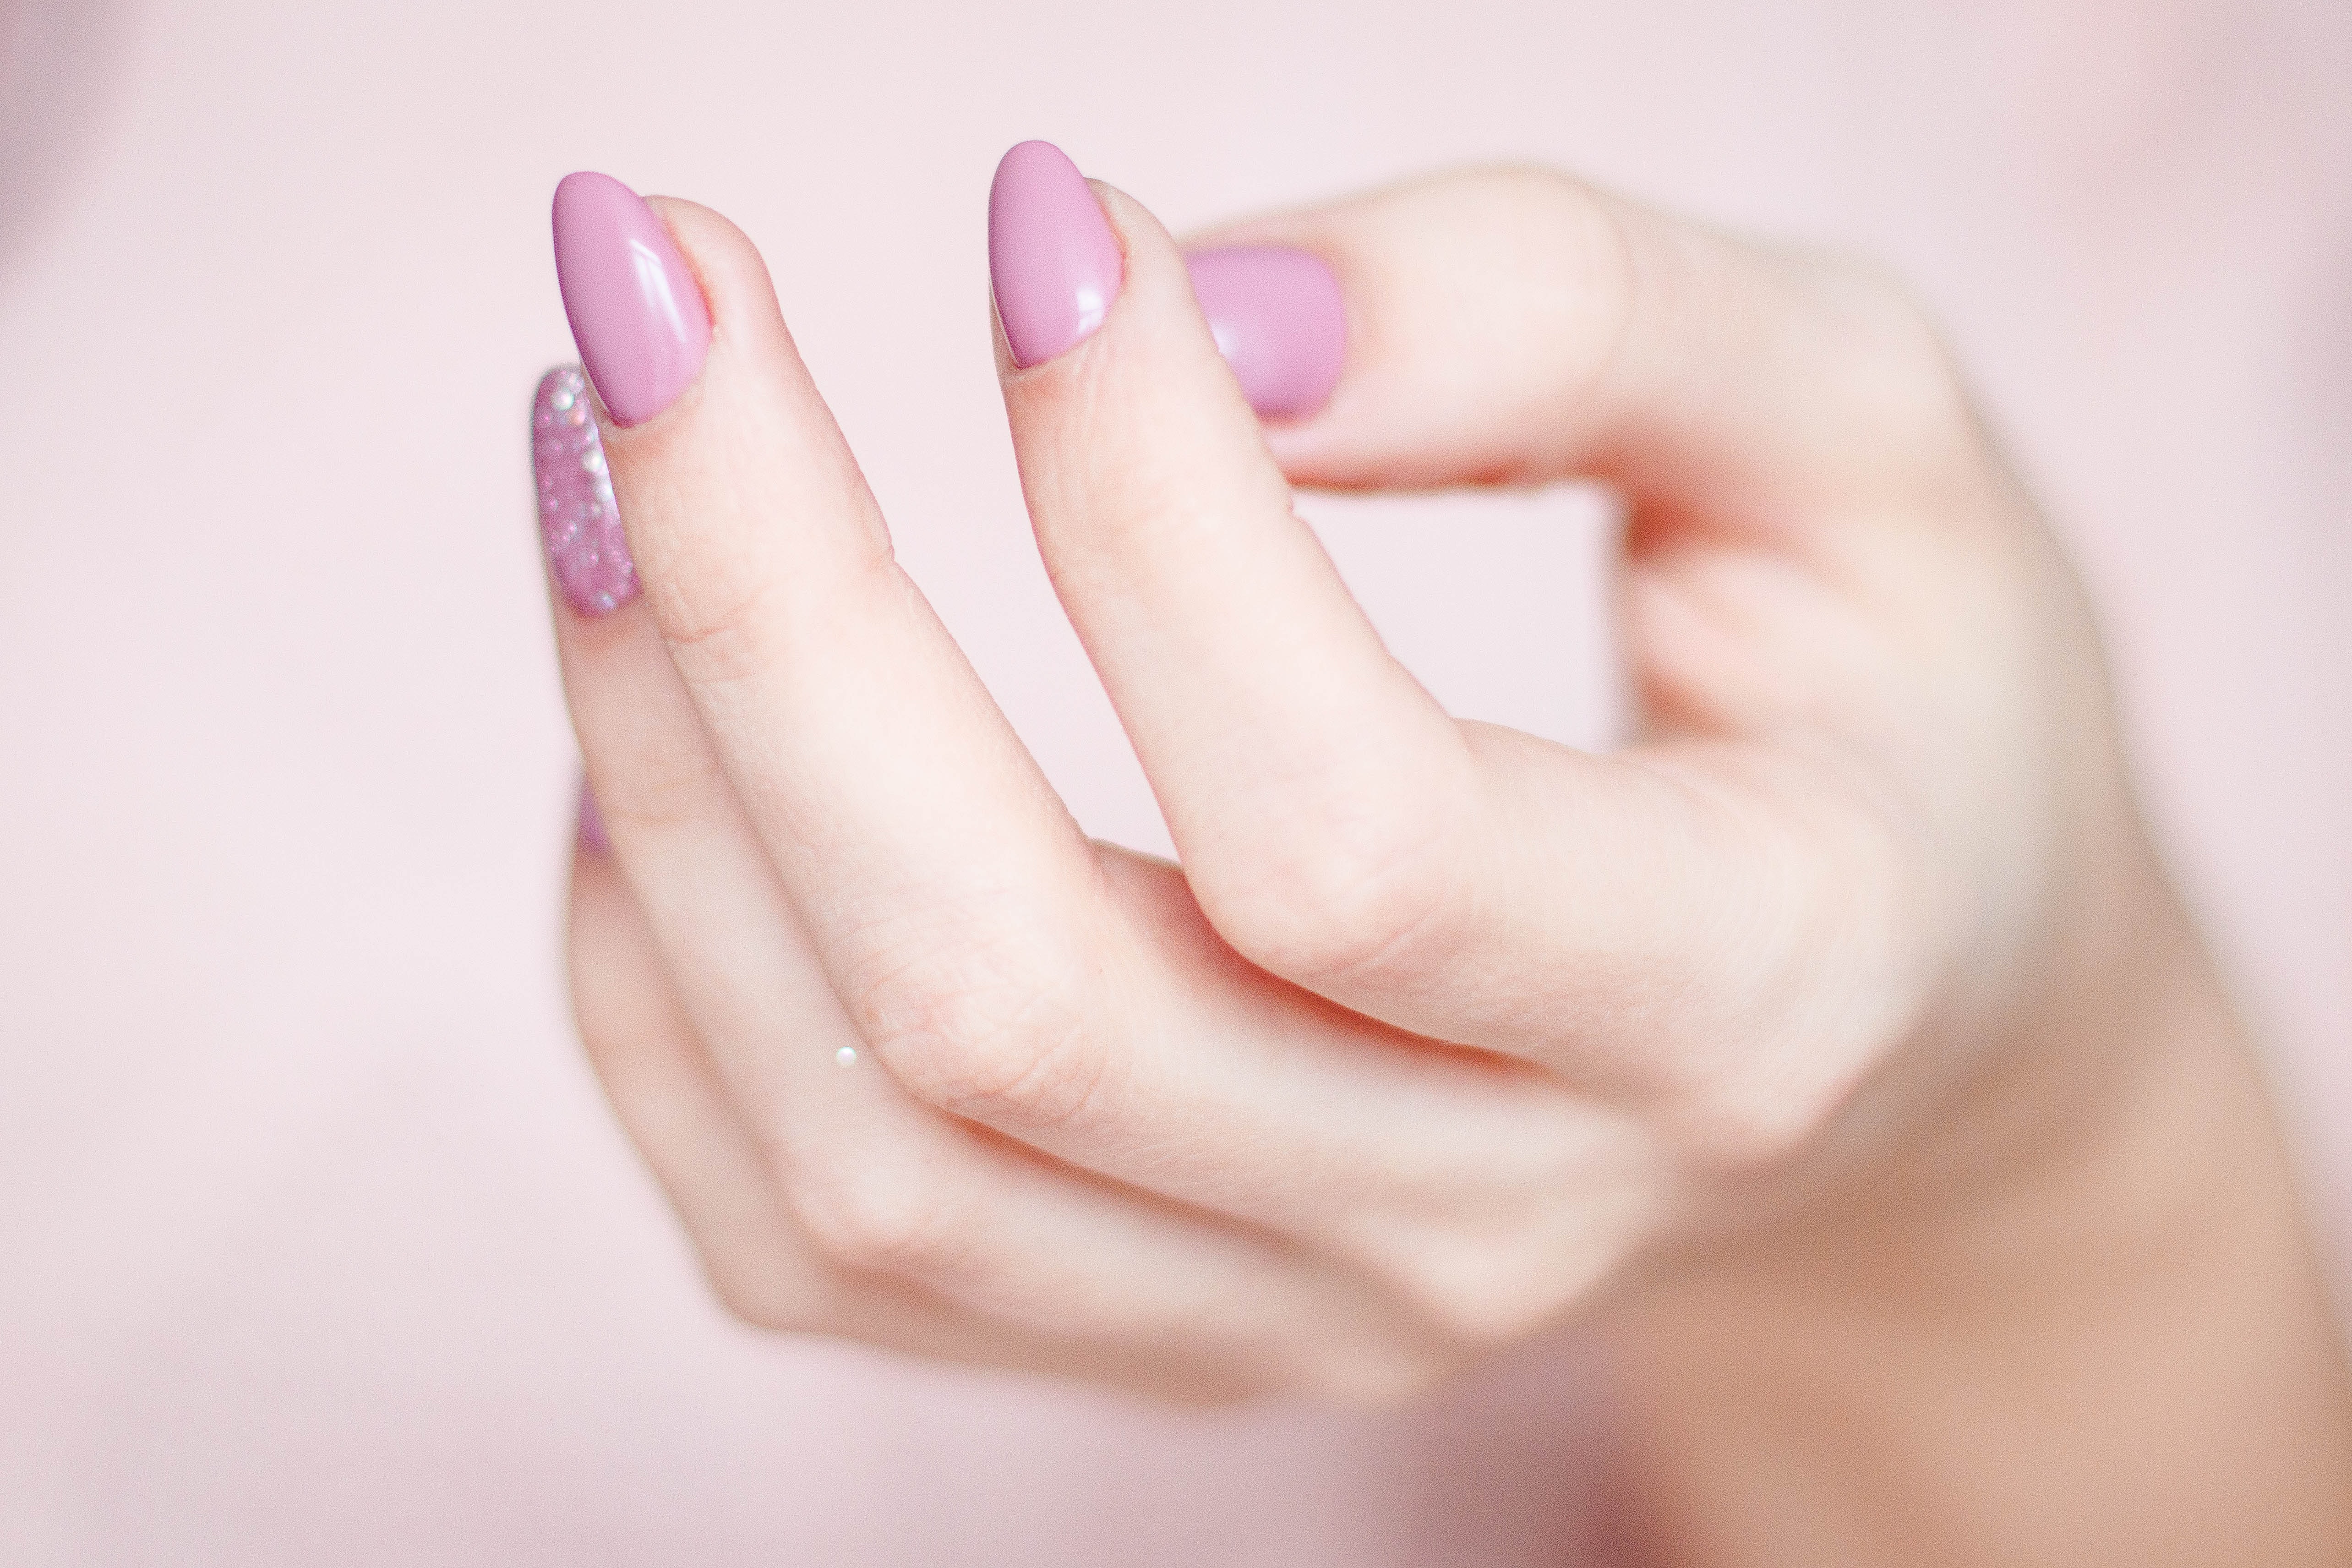 An image of a woman's perfectly manicured pink nails. | Source: Pexels